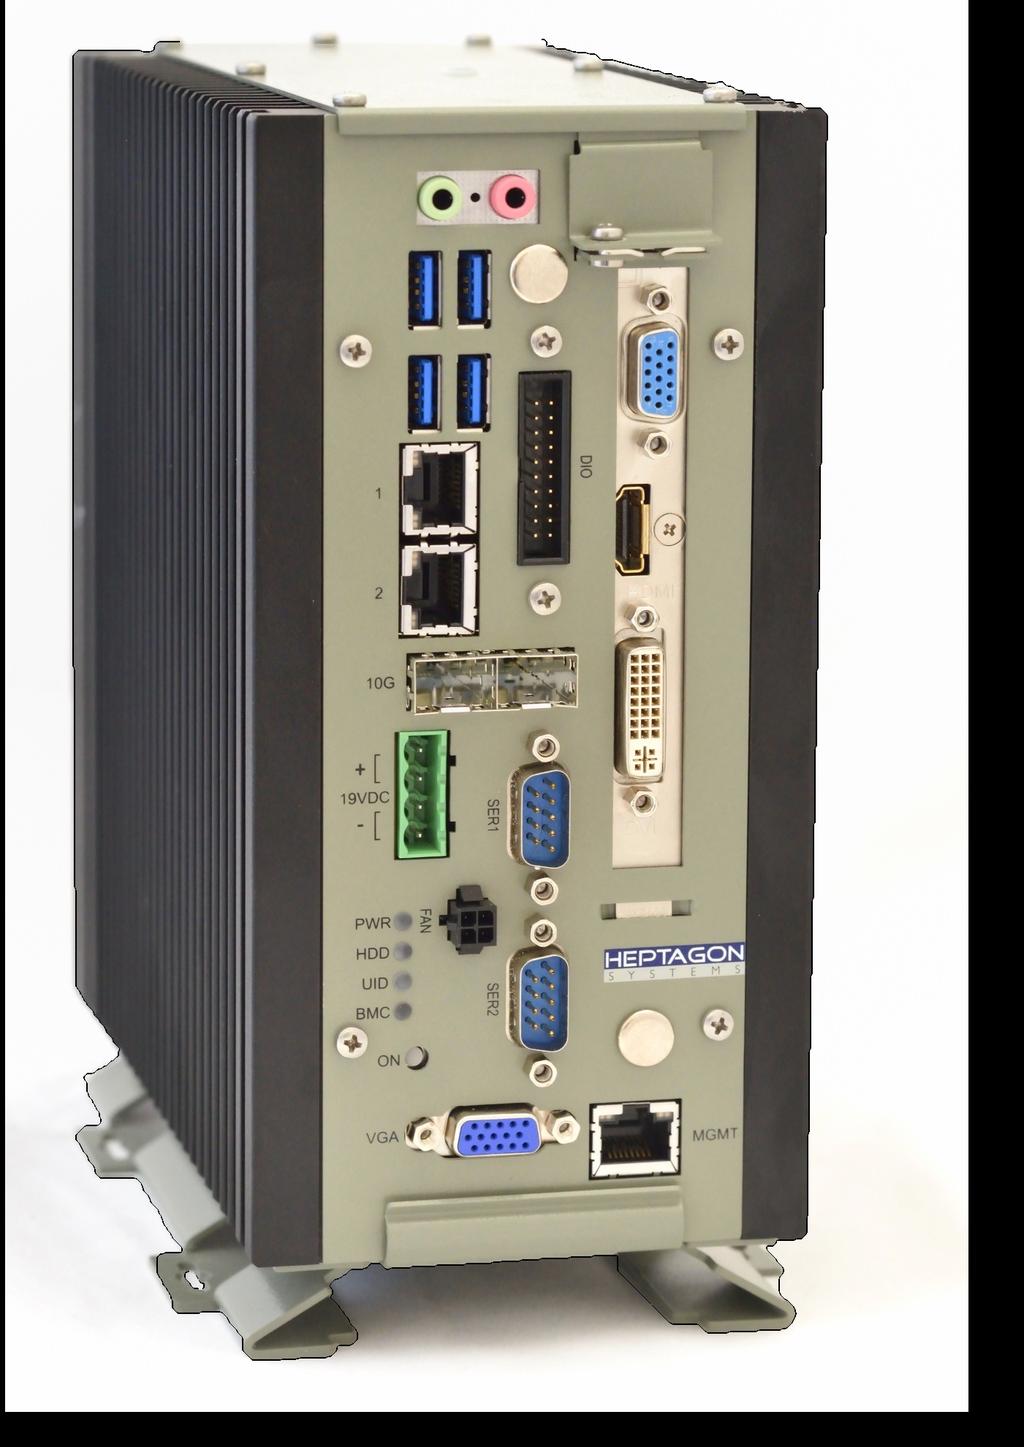 1. Introduction HQ-BOX is a series of rugged compact embedded fanless servers, based on Intel Xeon D-1500 server CPU s embedding up to 16 Cores, 128GB DDR4 ECC, 2x 10Gb SFP+, and more features for